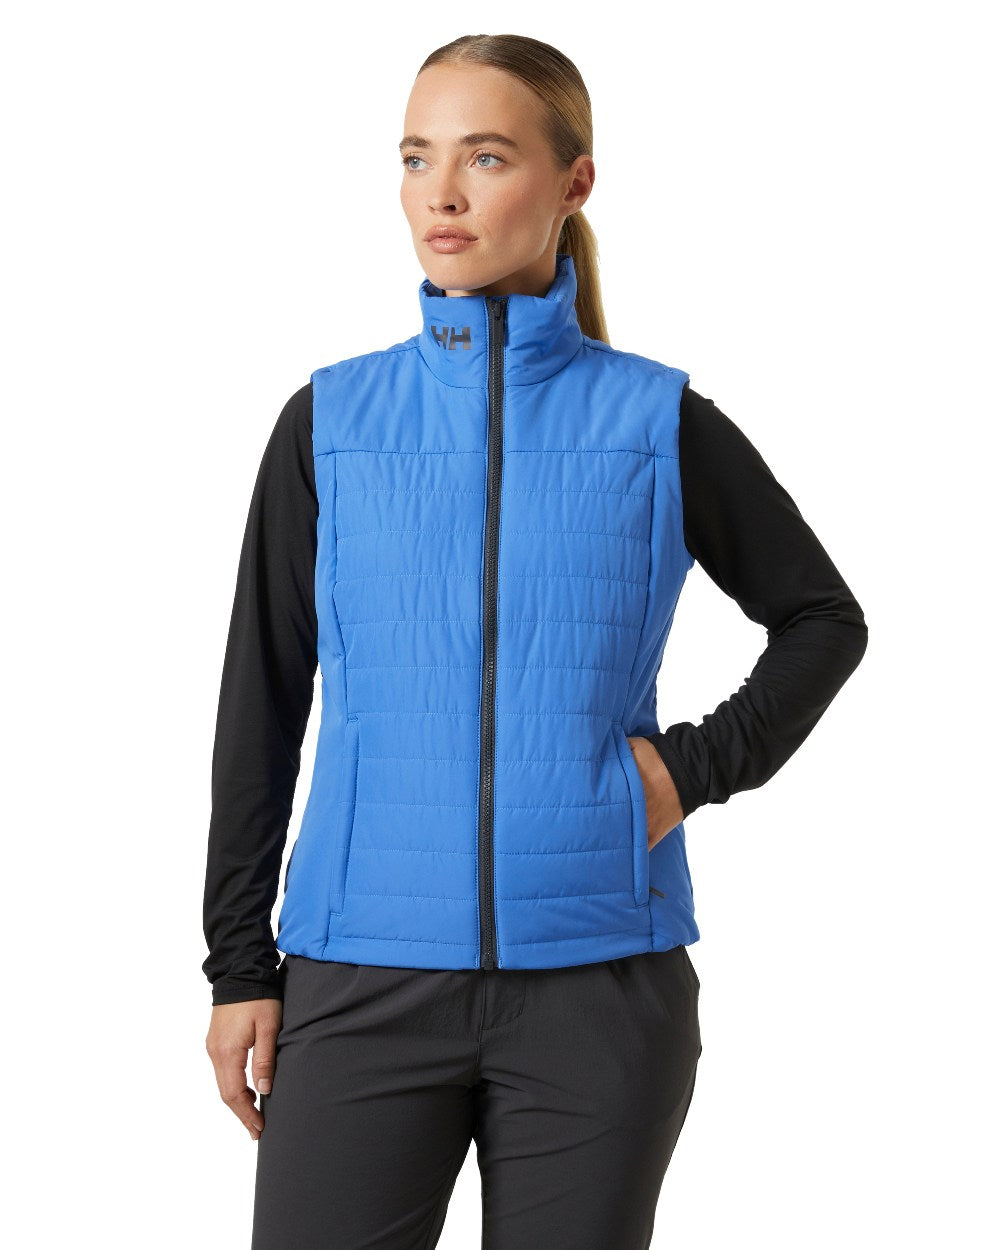 Ultra Blue Coloured Helly Hansen Womens Crew Insulated Vest 2.0 On A White Background 